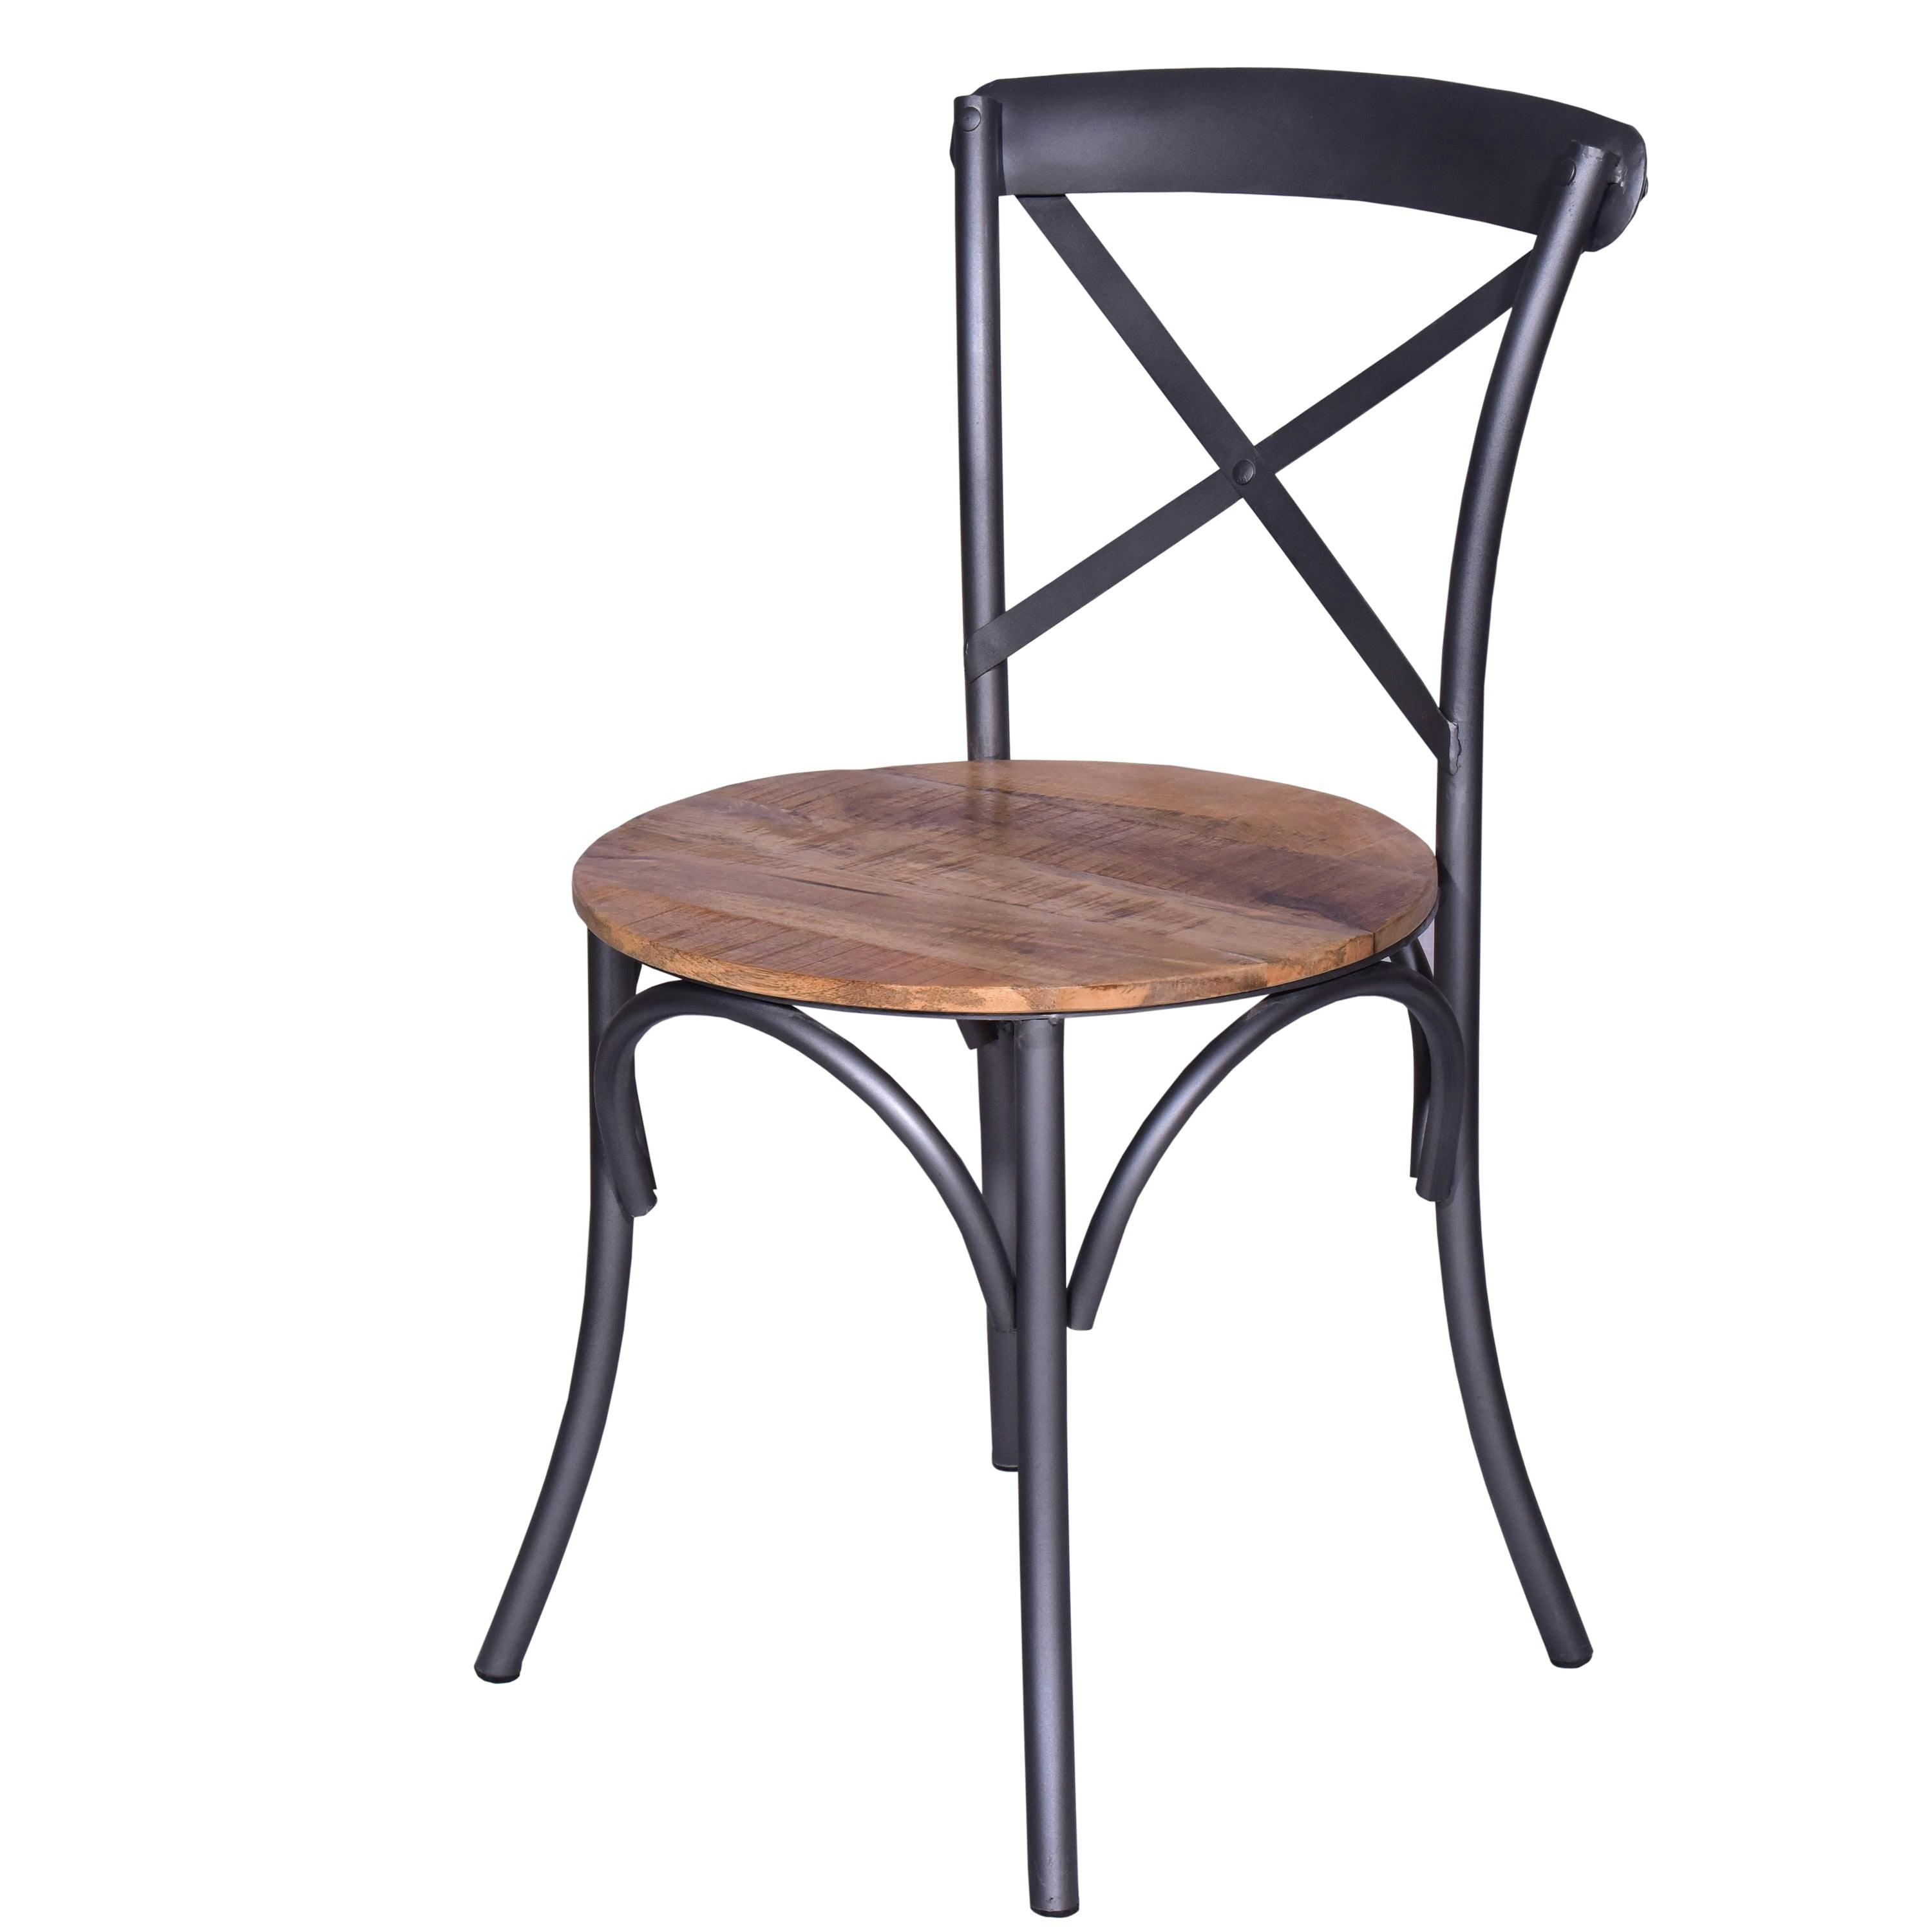 Rustic Industrial 19" Dining Chair with Mango Wood Seat and Metallic Frame